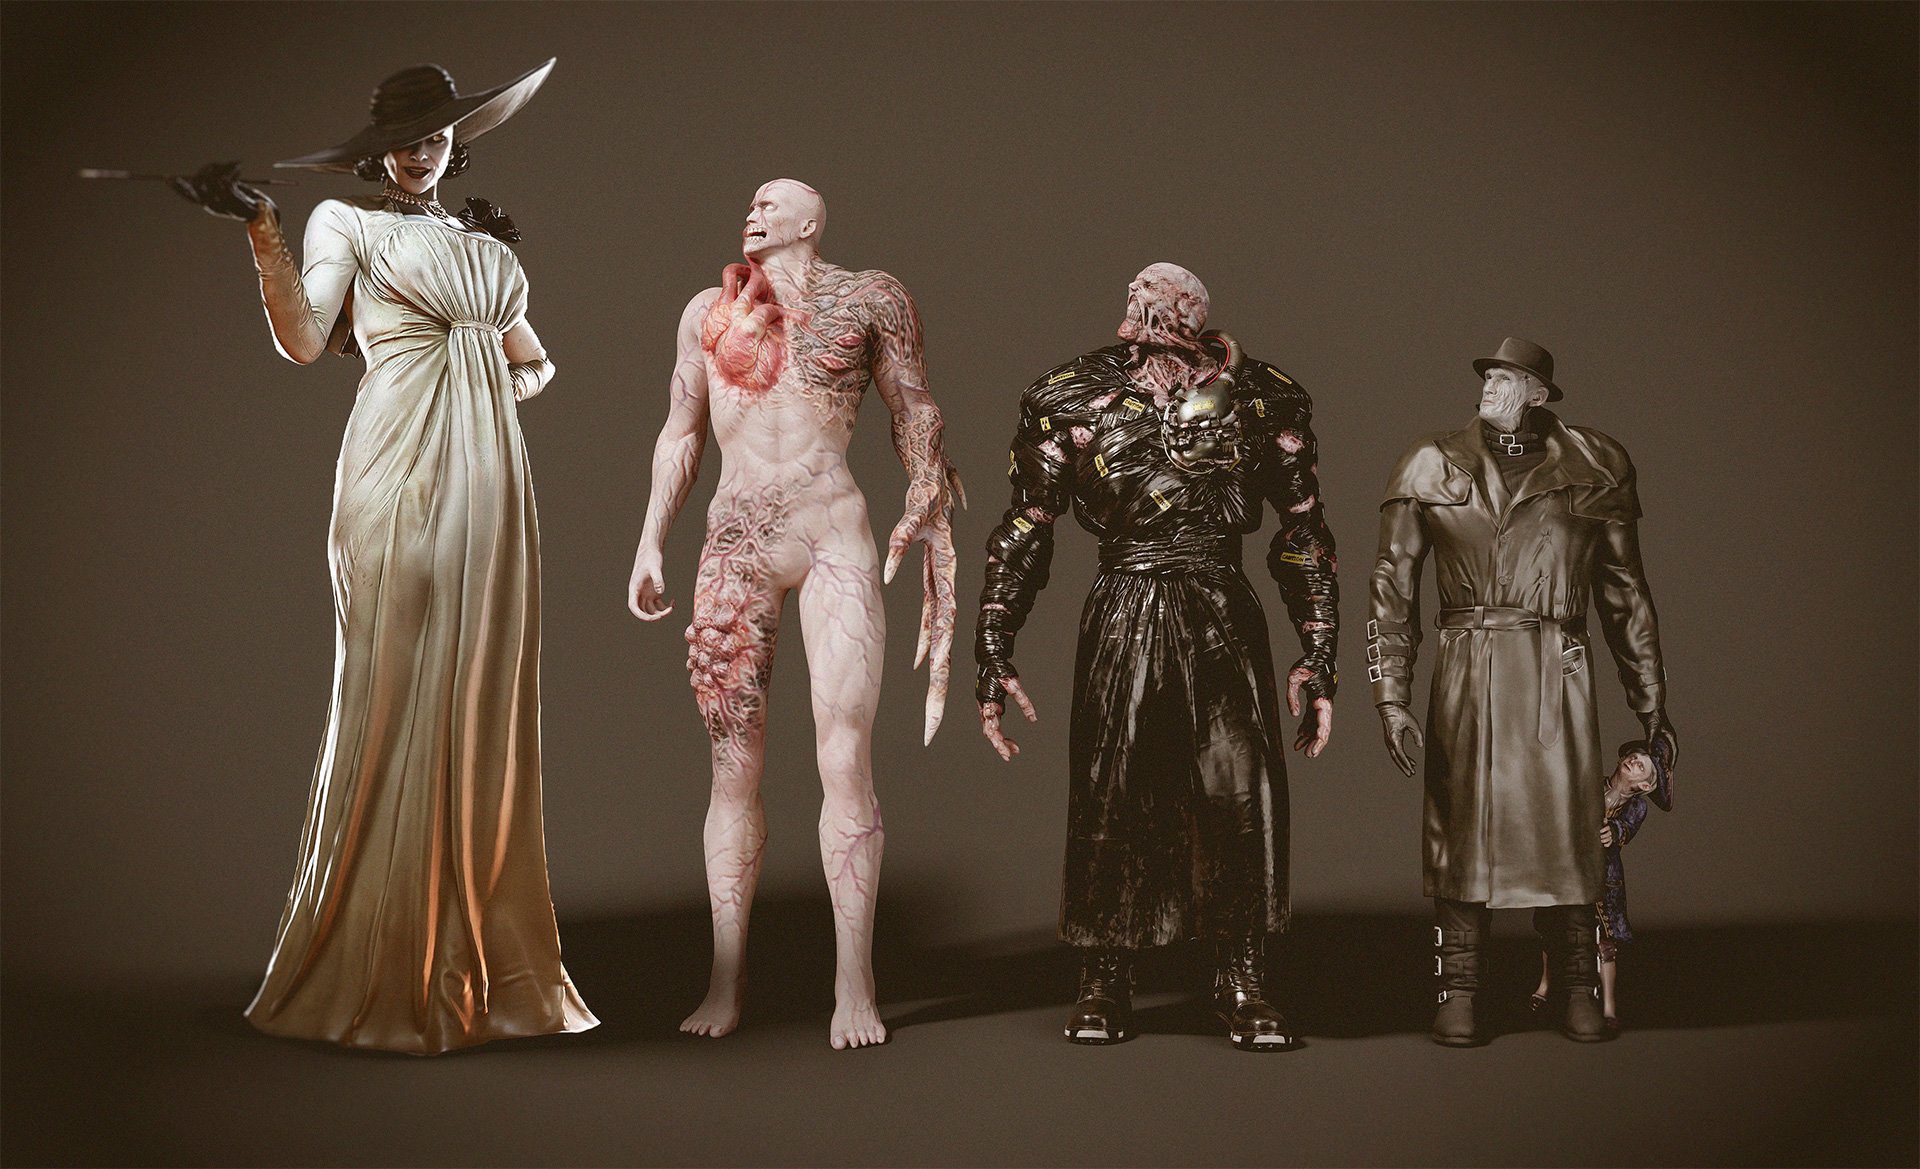 Resident Evil Village's Lady Dimitrescu is Taller Than Mr. X and